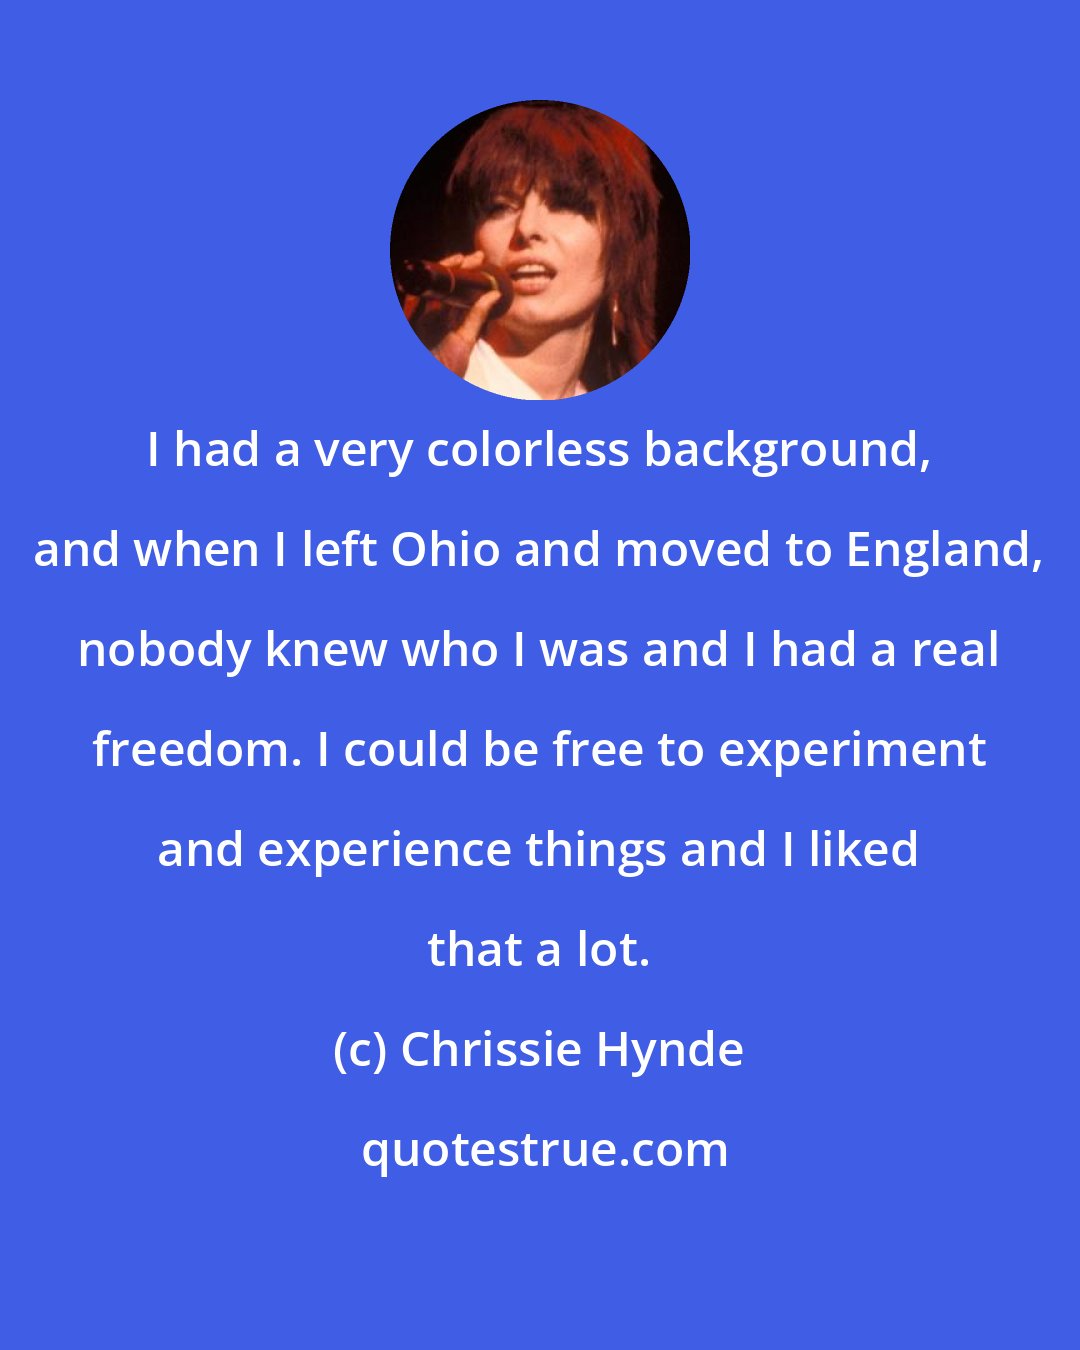 Chrissie Hynde: I had a very colorless background, and when I left Ohio and moved to England, nobody knew who I was and I had a real freedom. I could be free to experiment and experience things and I liked that a lot.